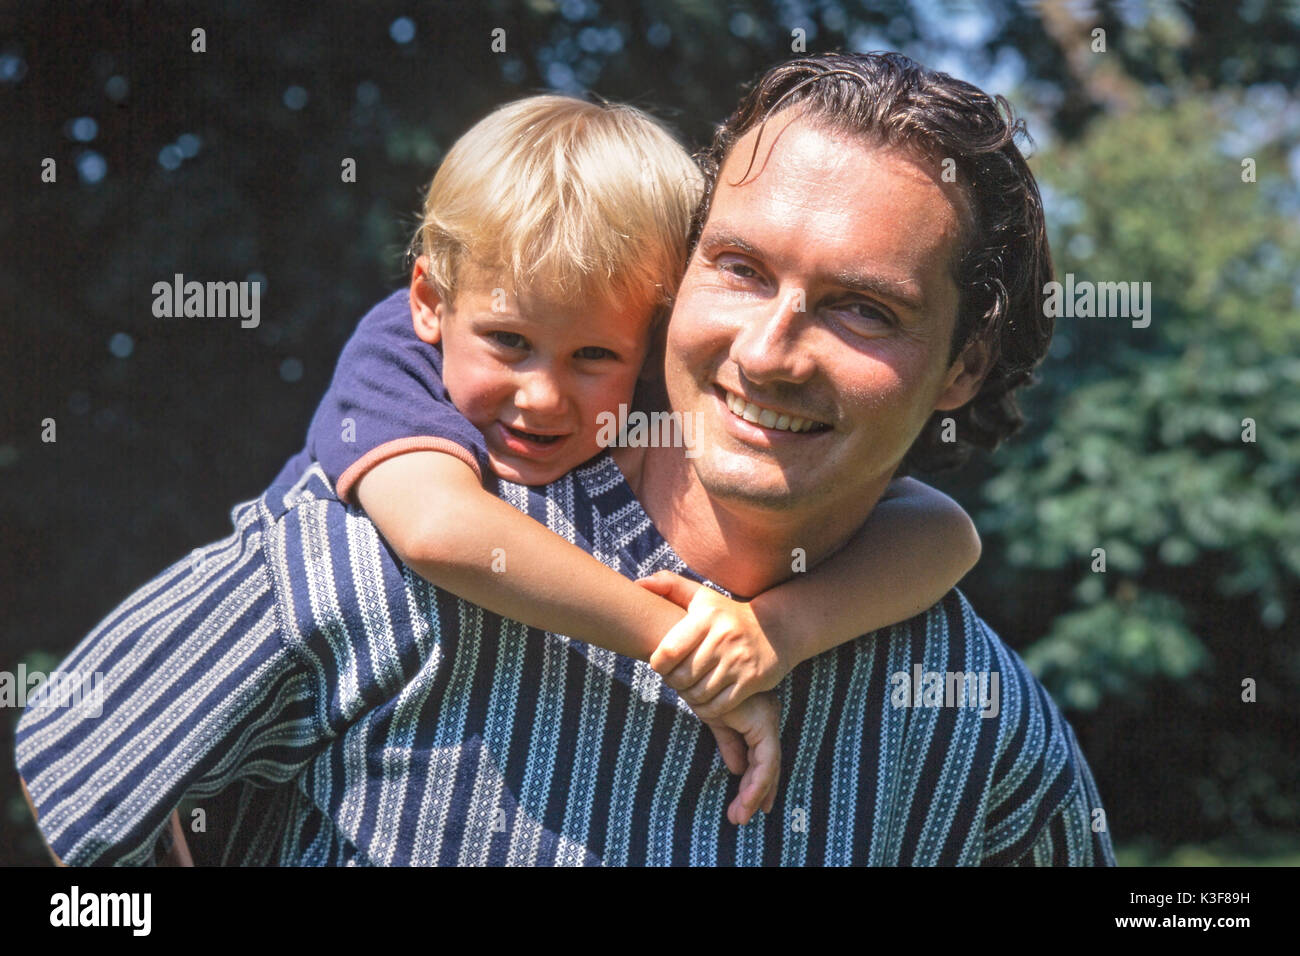 father with son on back Stock Photo